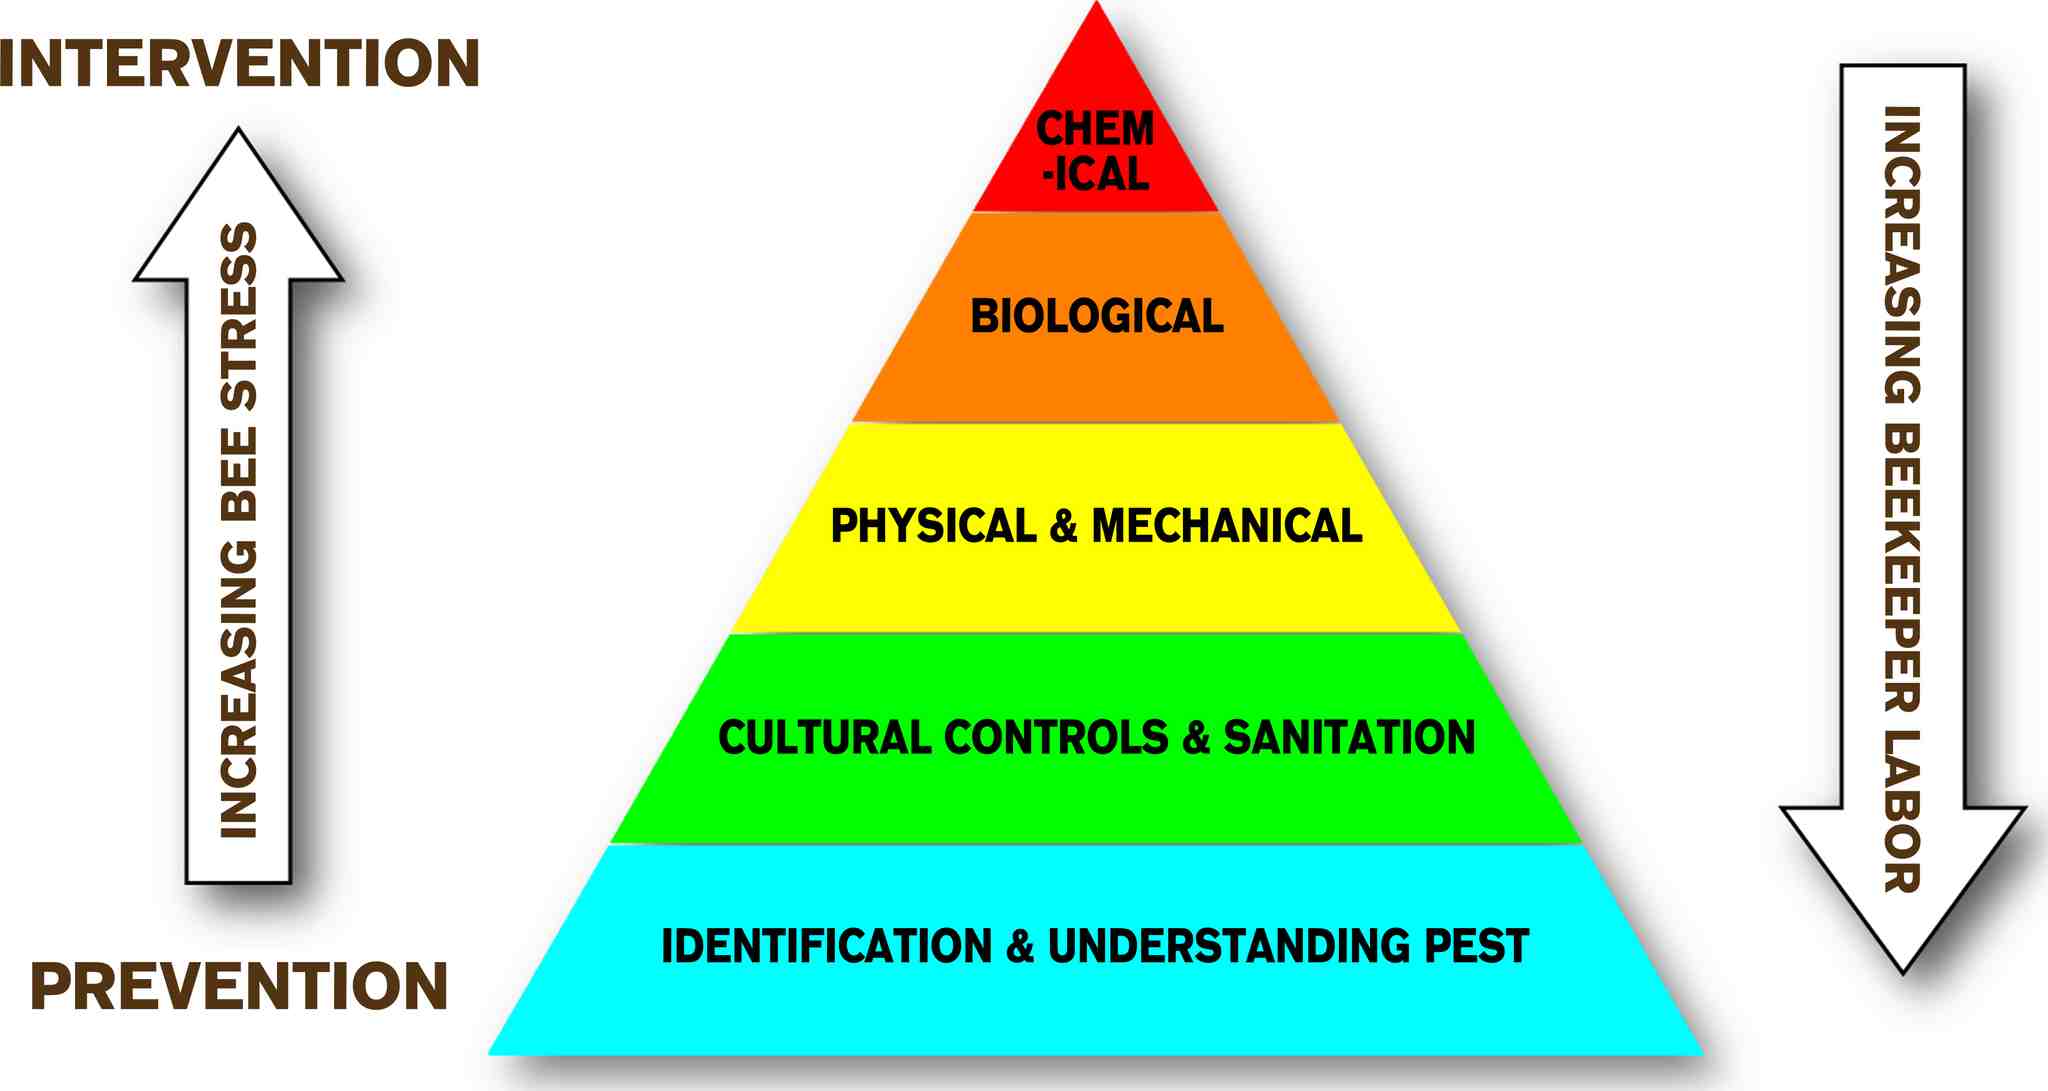 Integrated Pest Management Pyramid. At the base is Identification and Understanding Pest, next is Cultural Controls and Sanitation, then Physical and Mechanical, then Biological, and then Chemical. As you go from the base to the top you are looking at prevention methods first until the top where you are looking at intervention methods. As you get to the top of the pyramid, you have increasing bee stress, but decreasing beekeeper labor. This pyramid indicates that it is easier on the beekeeper to intervene with bee issues, but this comes with increasing bee stress. For this reason, it is harder on the beekeeper, but better for bee health to prevent issues before they arise.